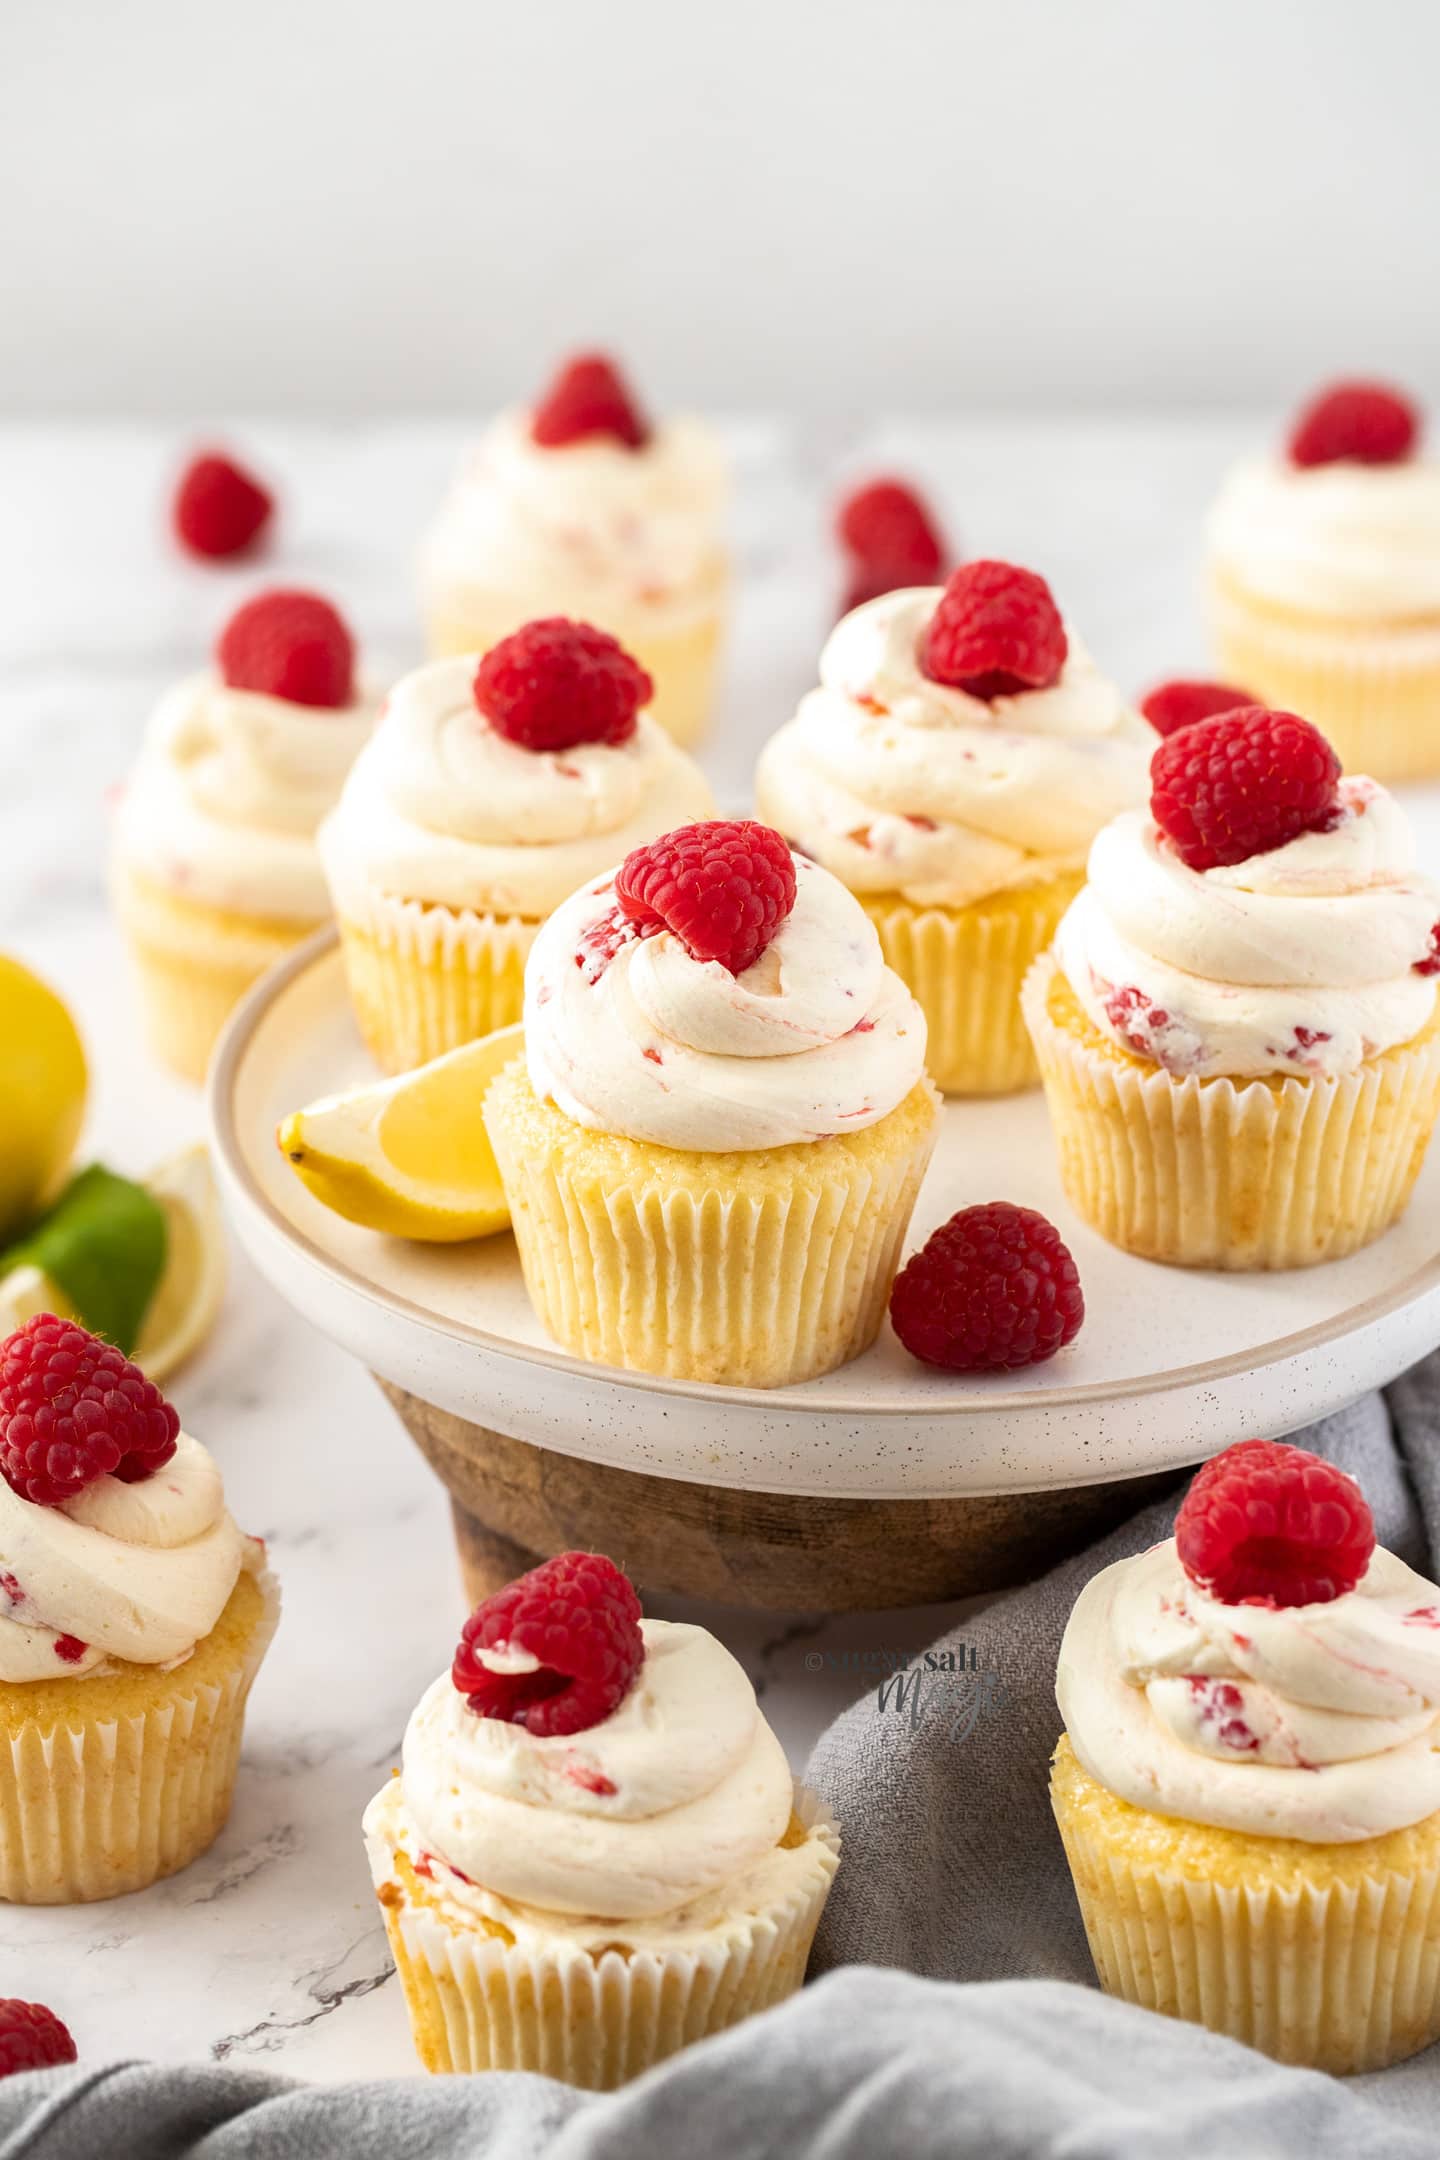 A batch of cupcakes topped with raspberries on a white plate.